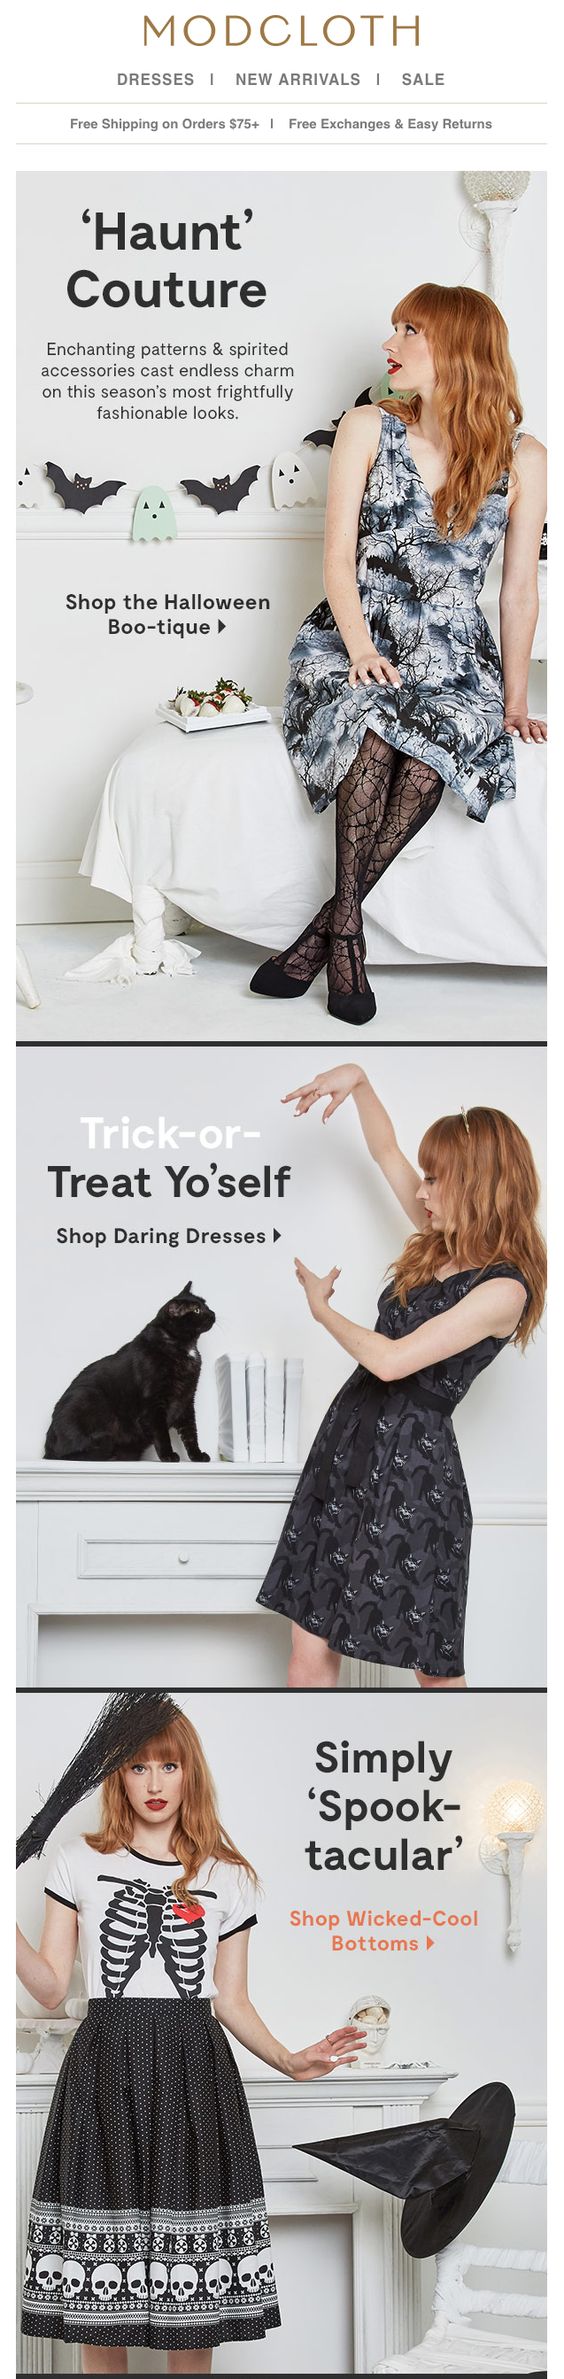 ideas to boost halloween sales